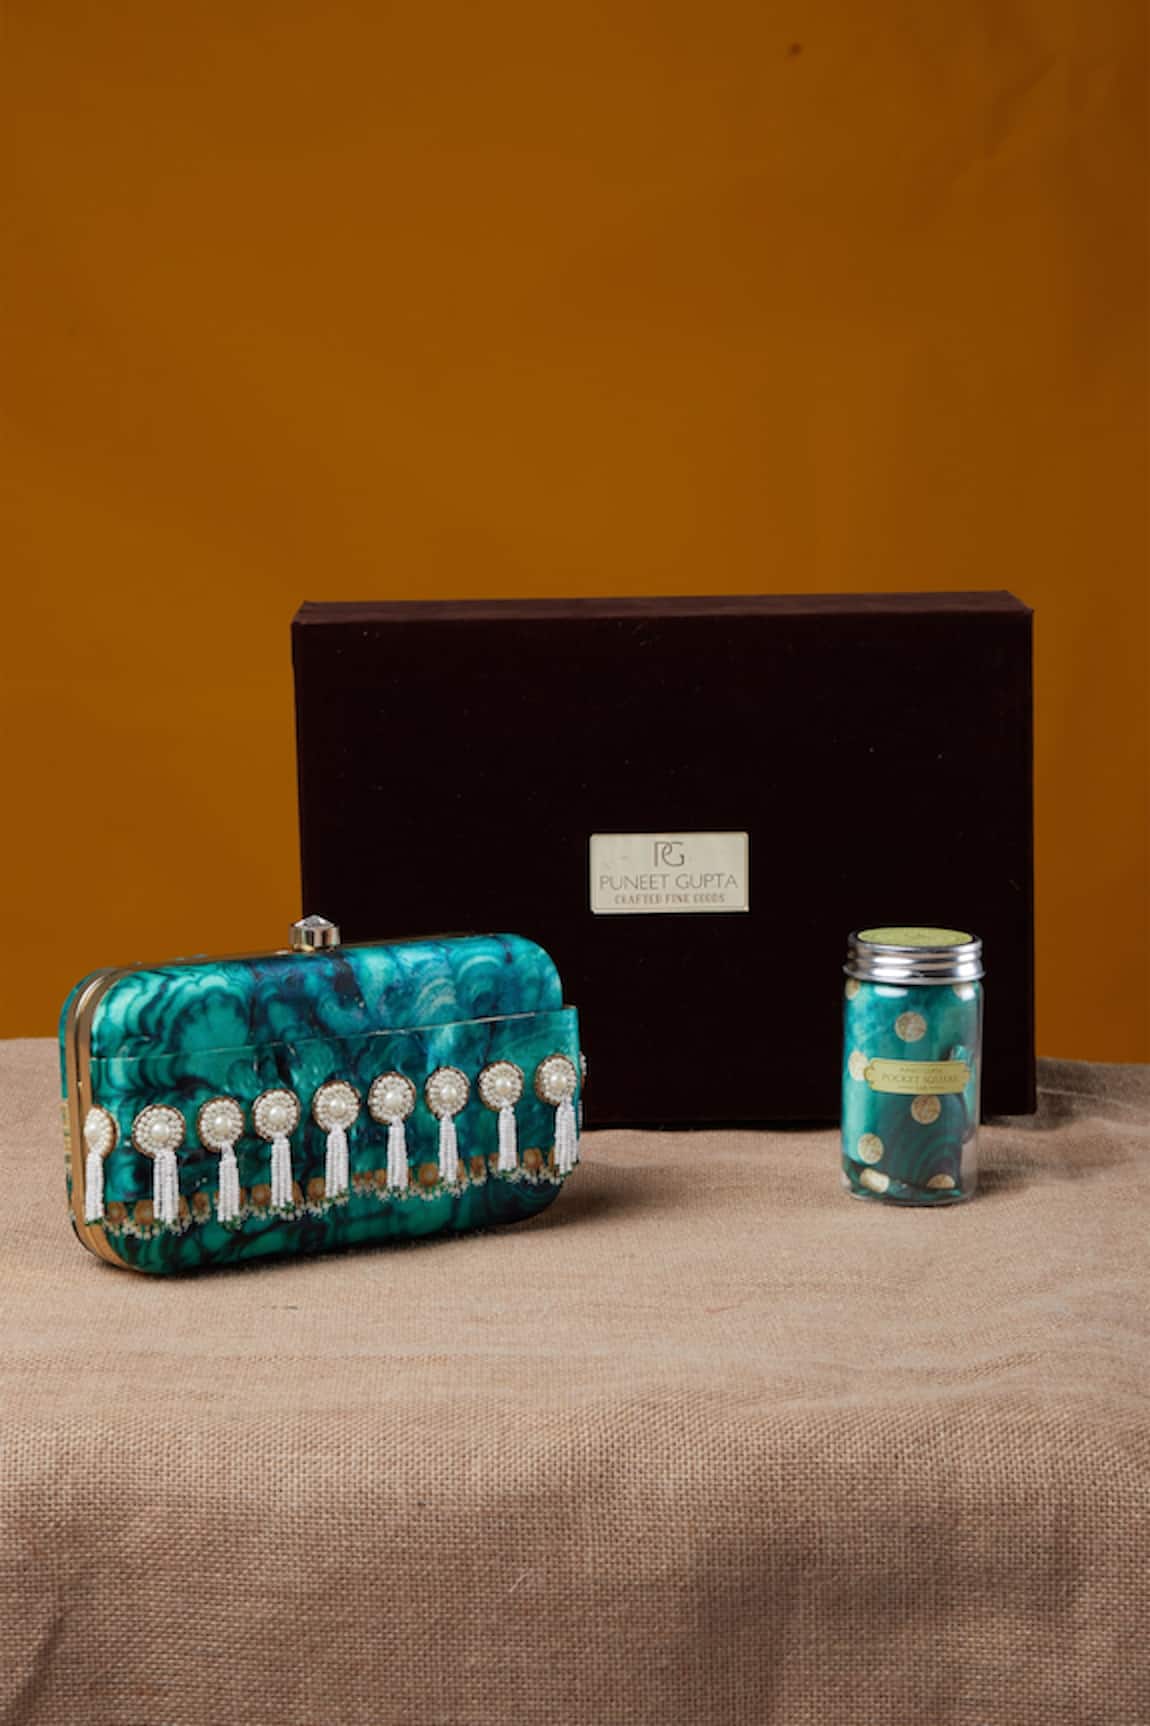 Puneet Gupta Hand Embroidered Clutch & Pocket Square Gift Box